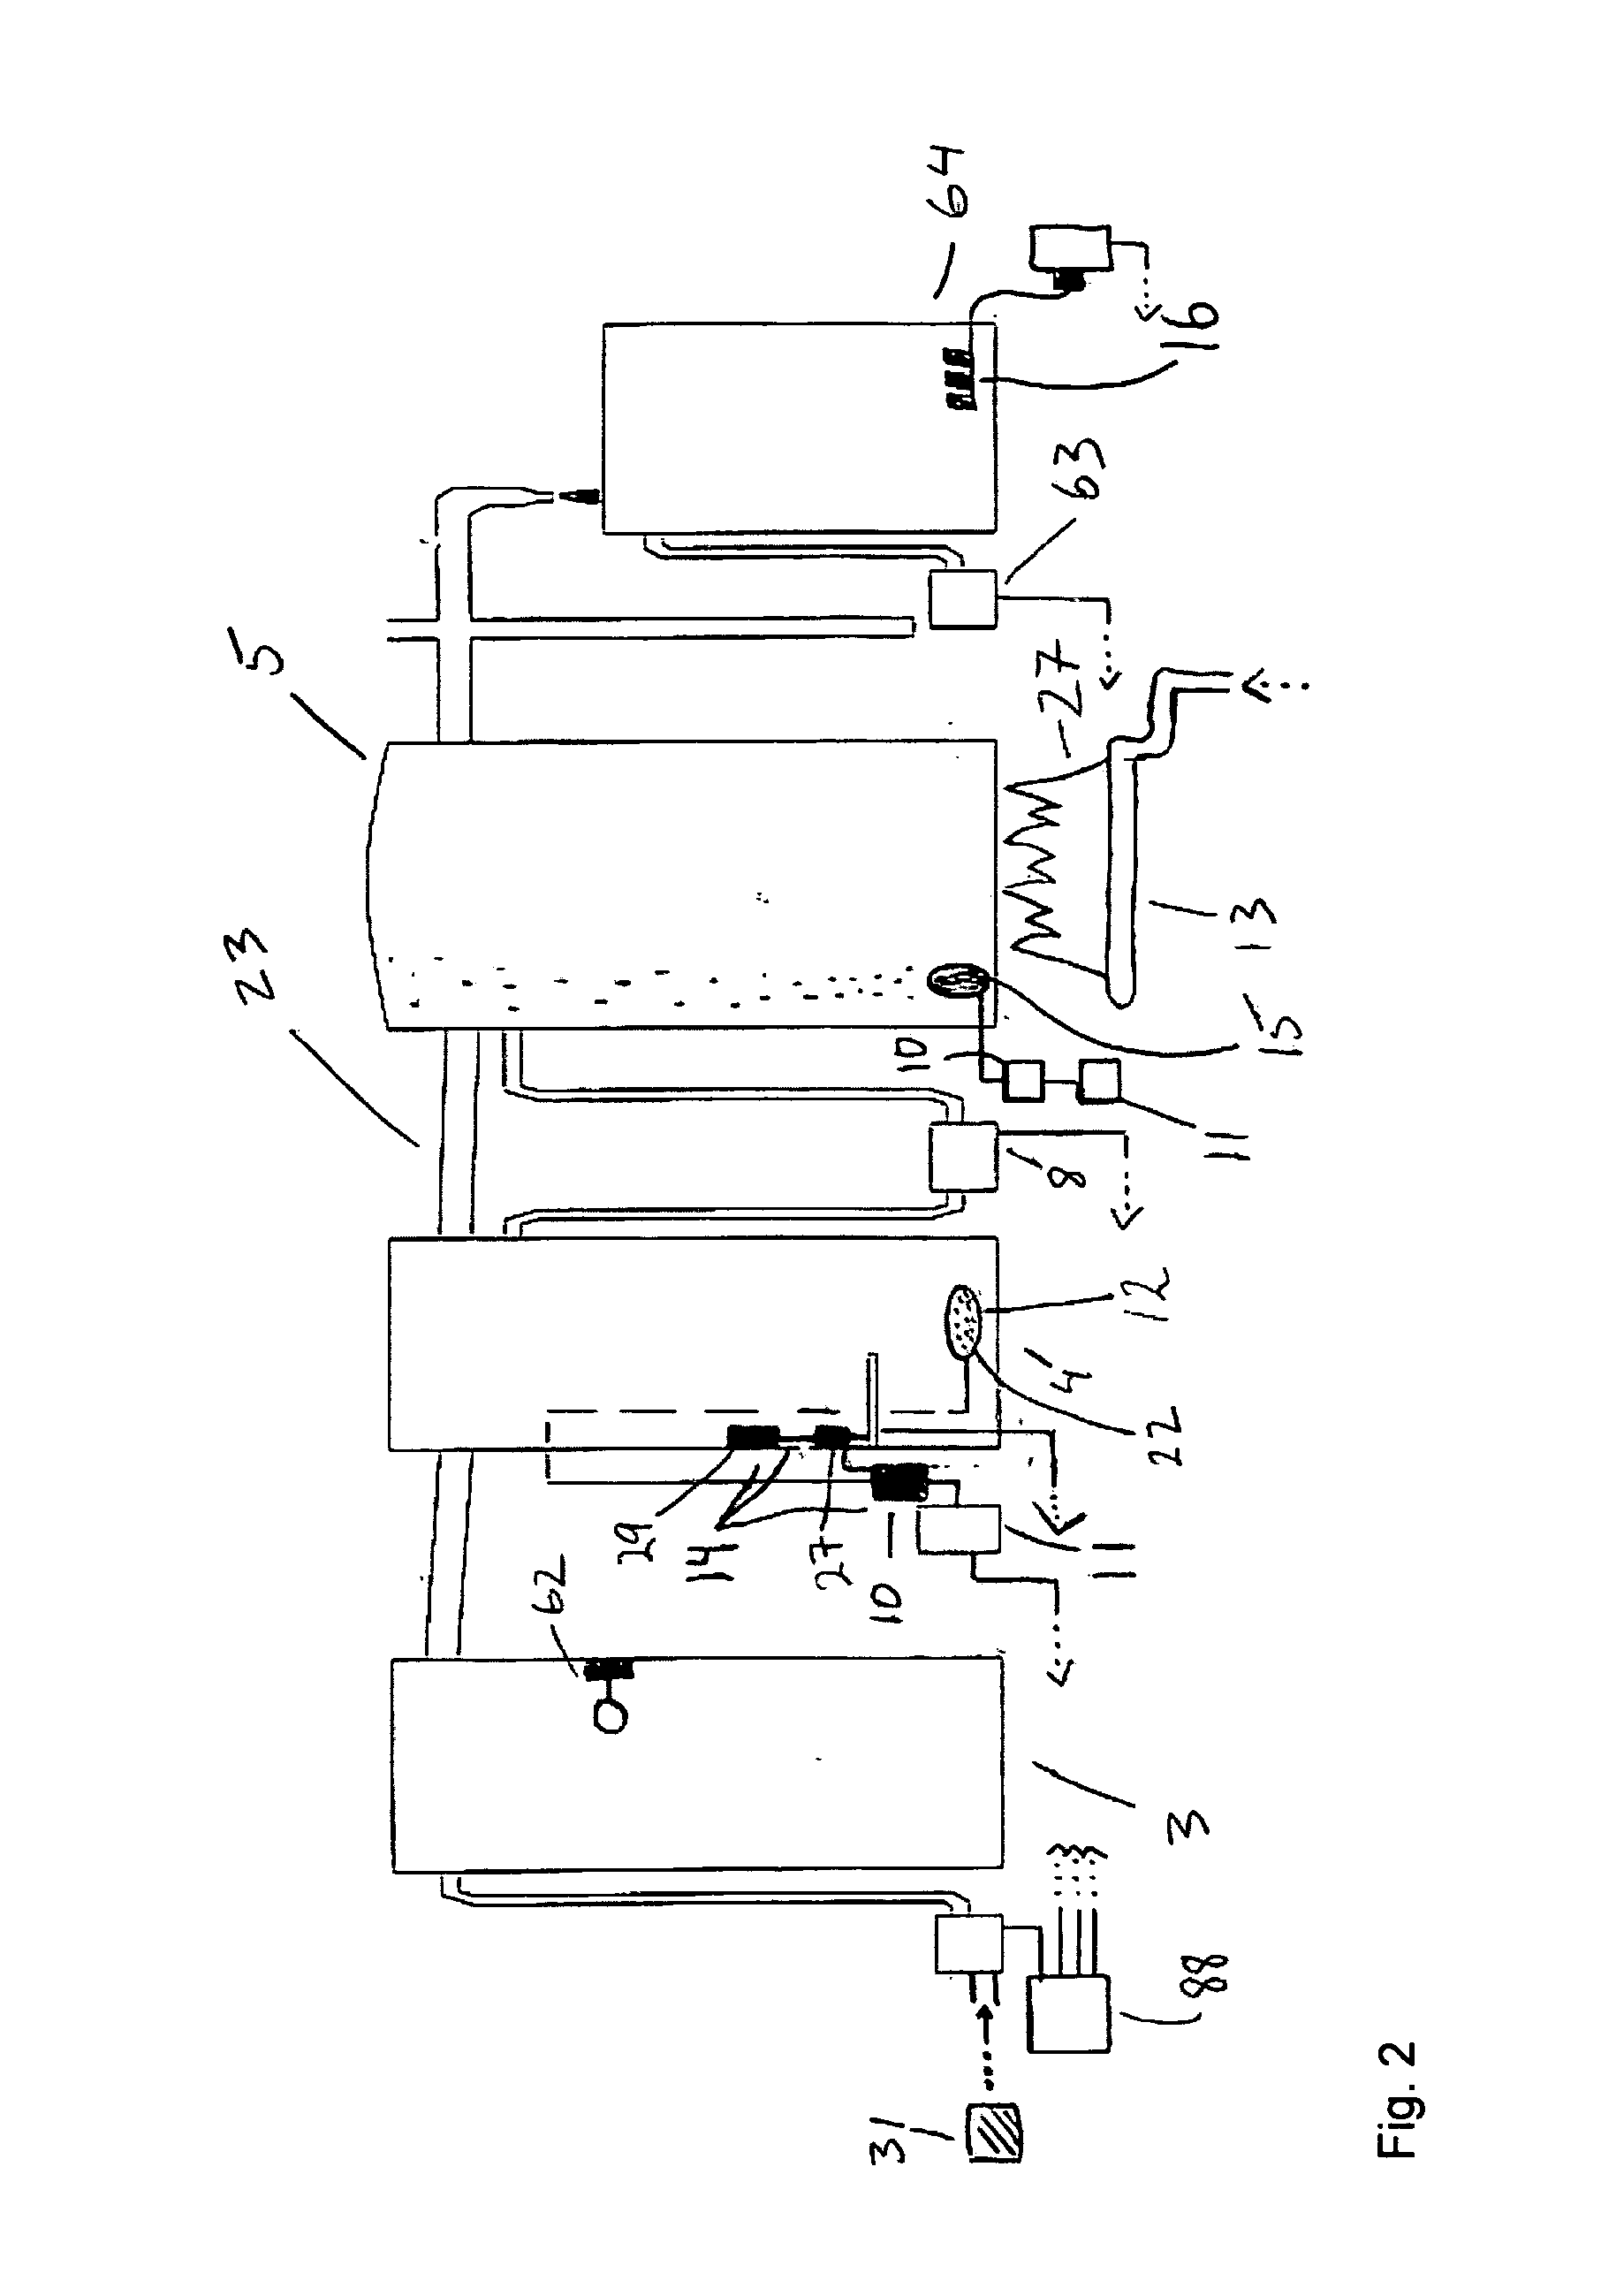 Wastewater disinfection apparatus and methods